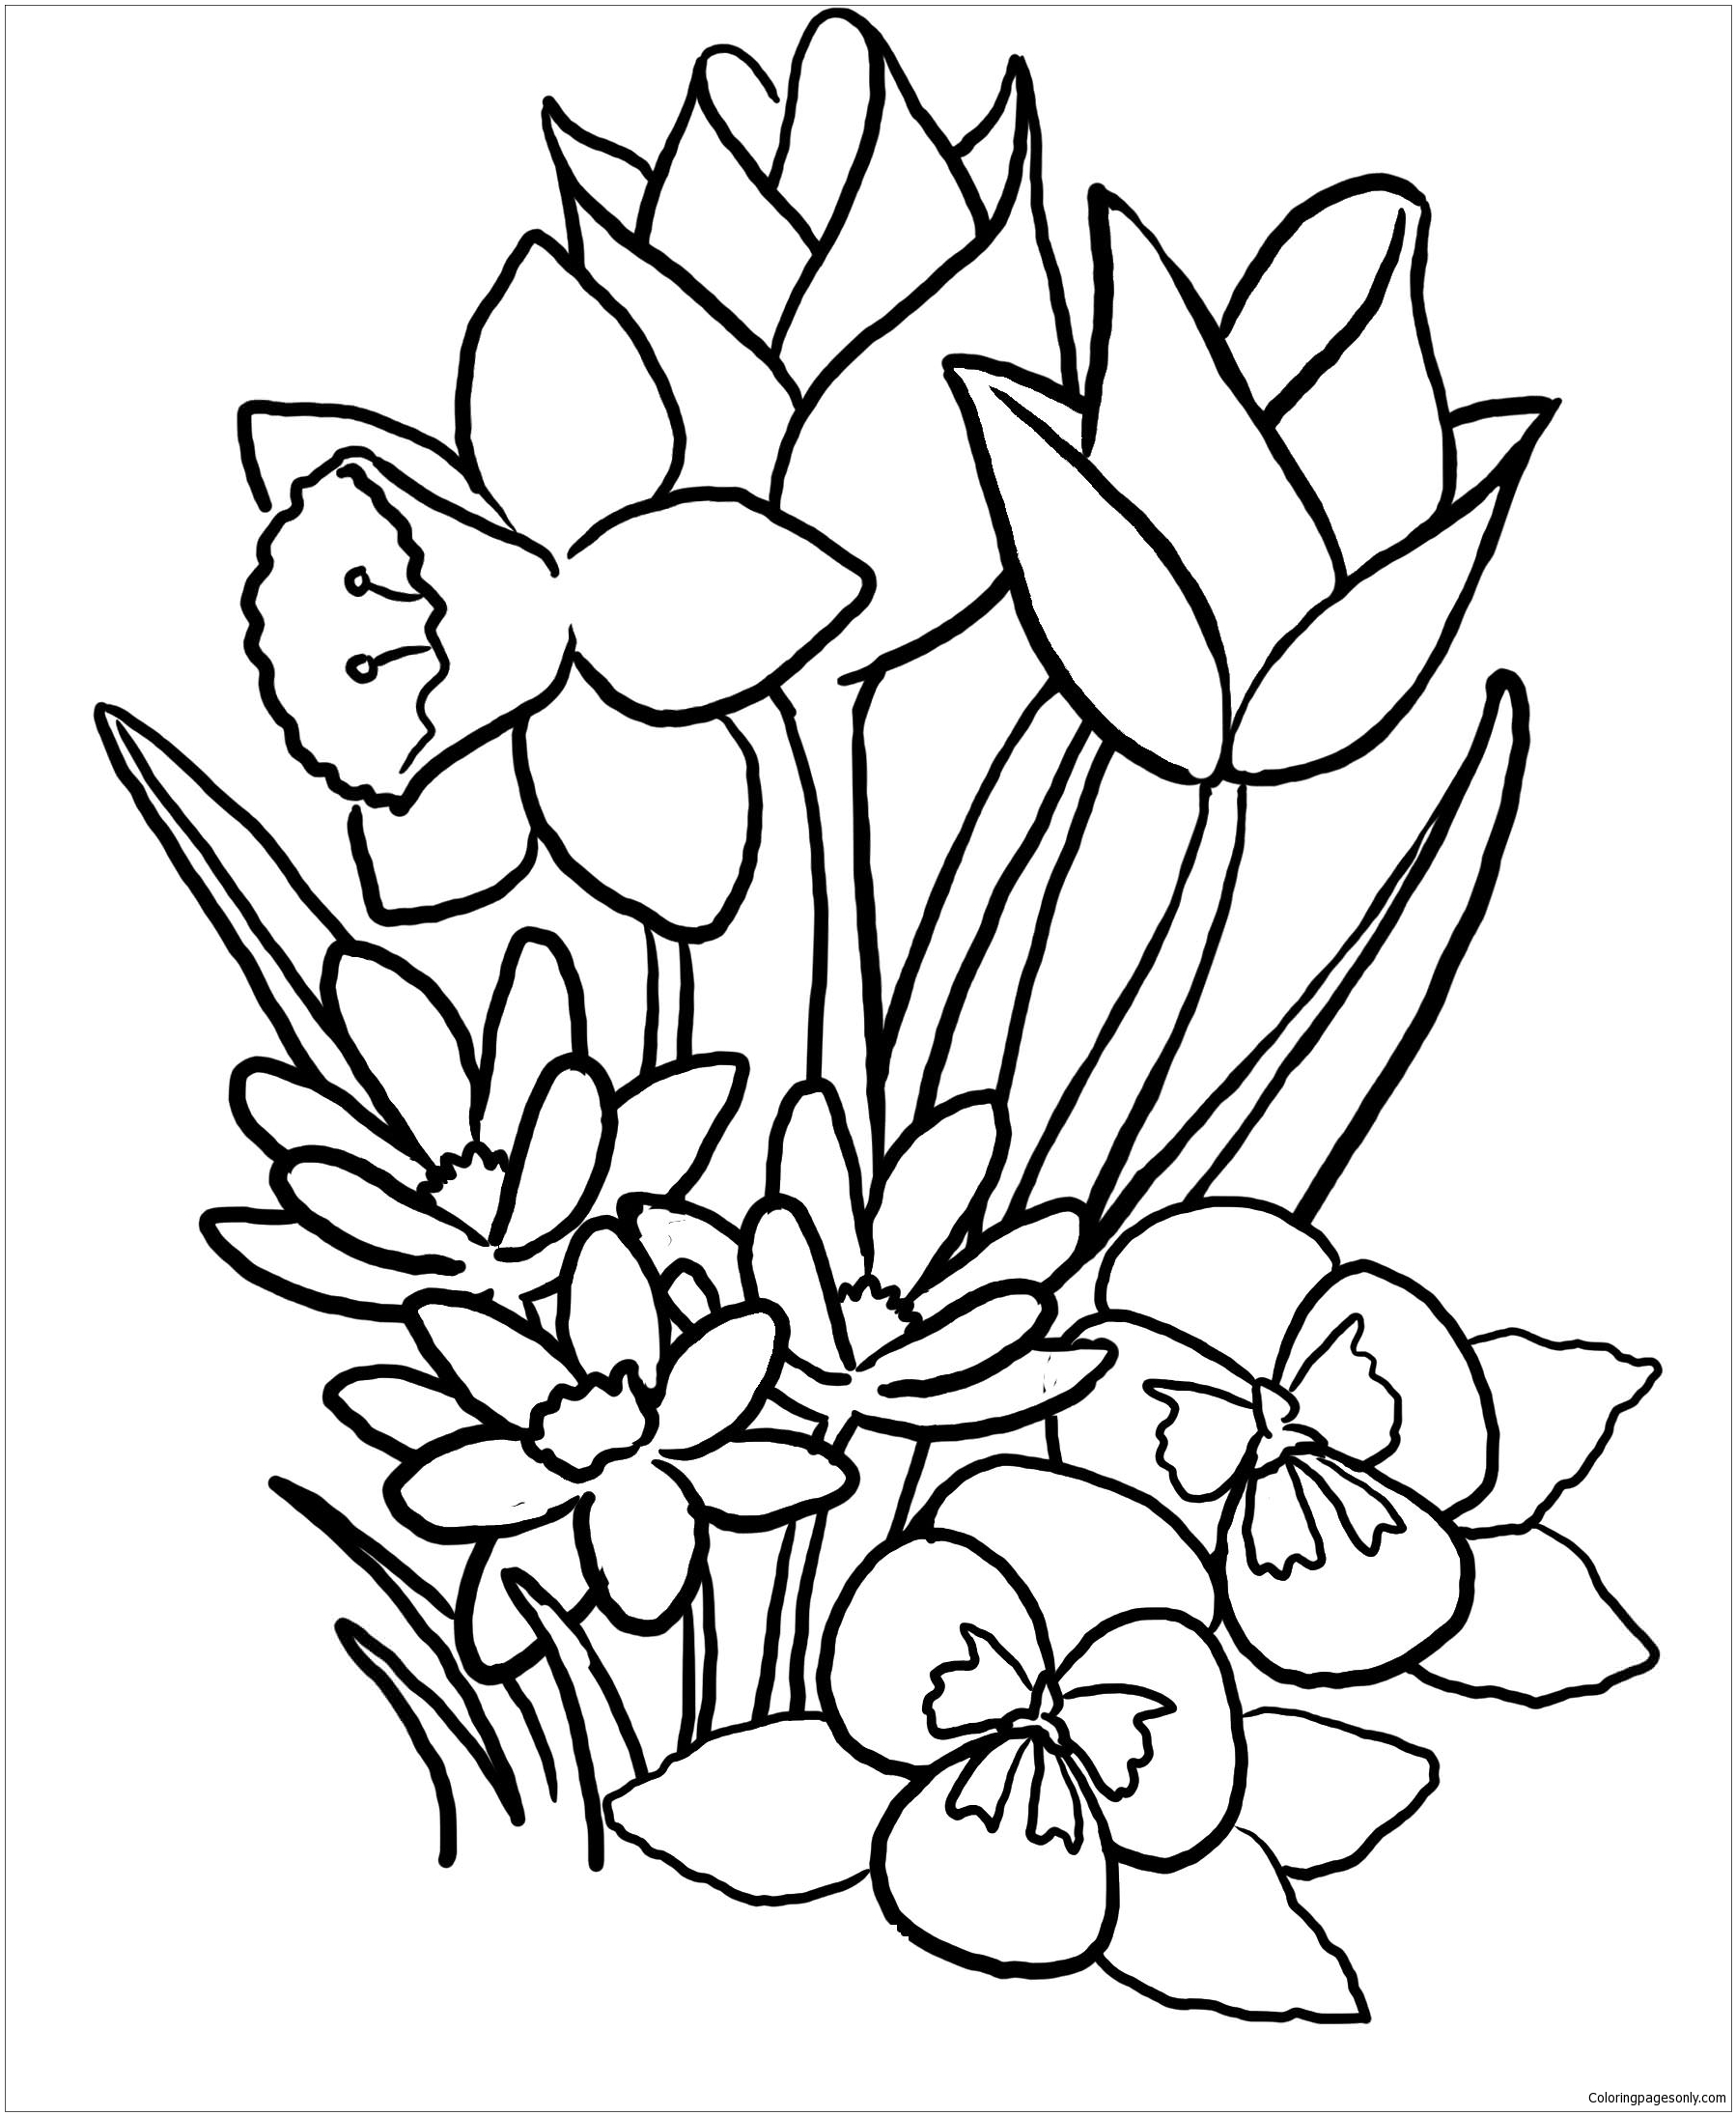 Download Spring Flowers 1 Coloring Pages Nature Seasons Coloring Pages Coloring Pages For Kids And Adults